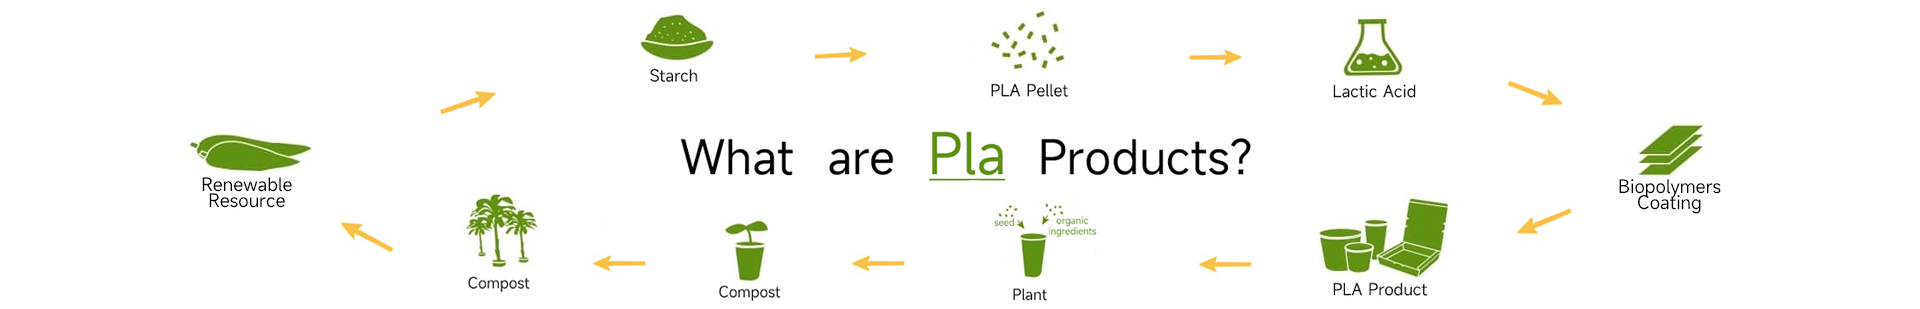 What are Pla Products